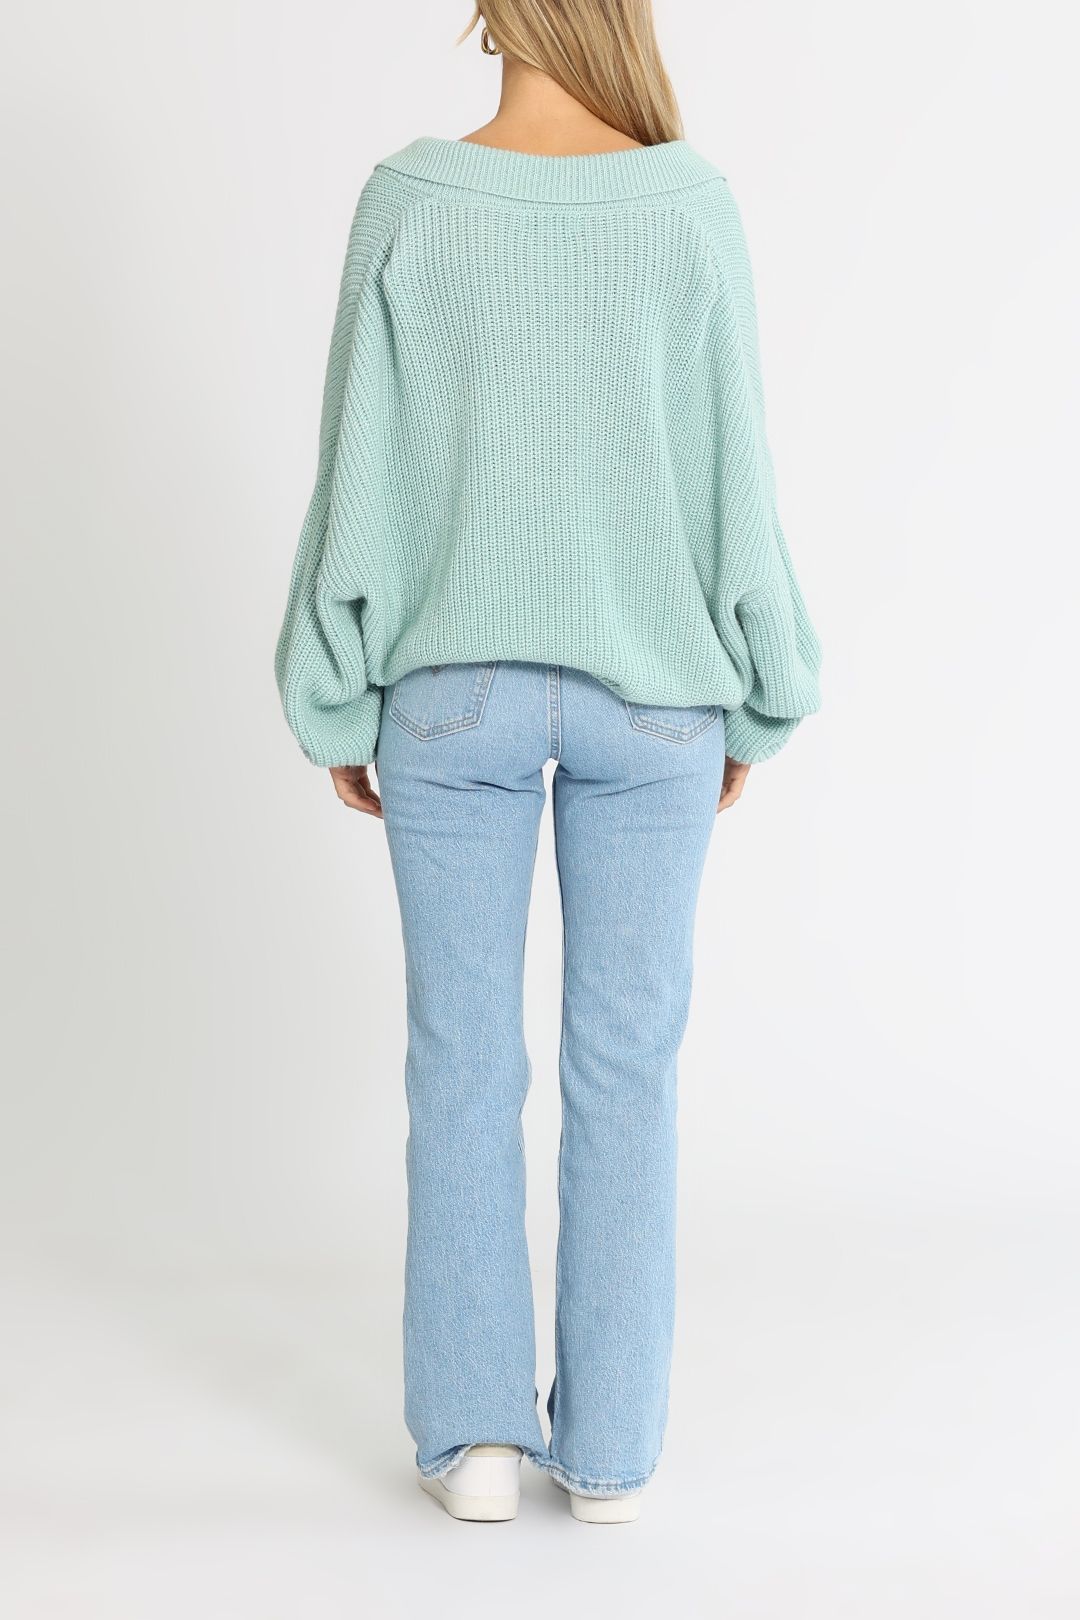 Charlie Holiday The Luciana Sweater Dusty Blue Relaxed Fit